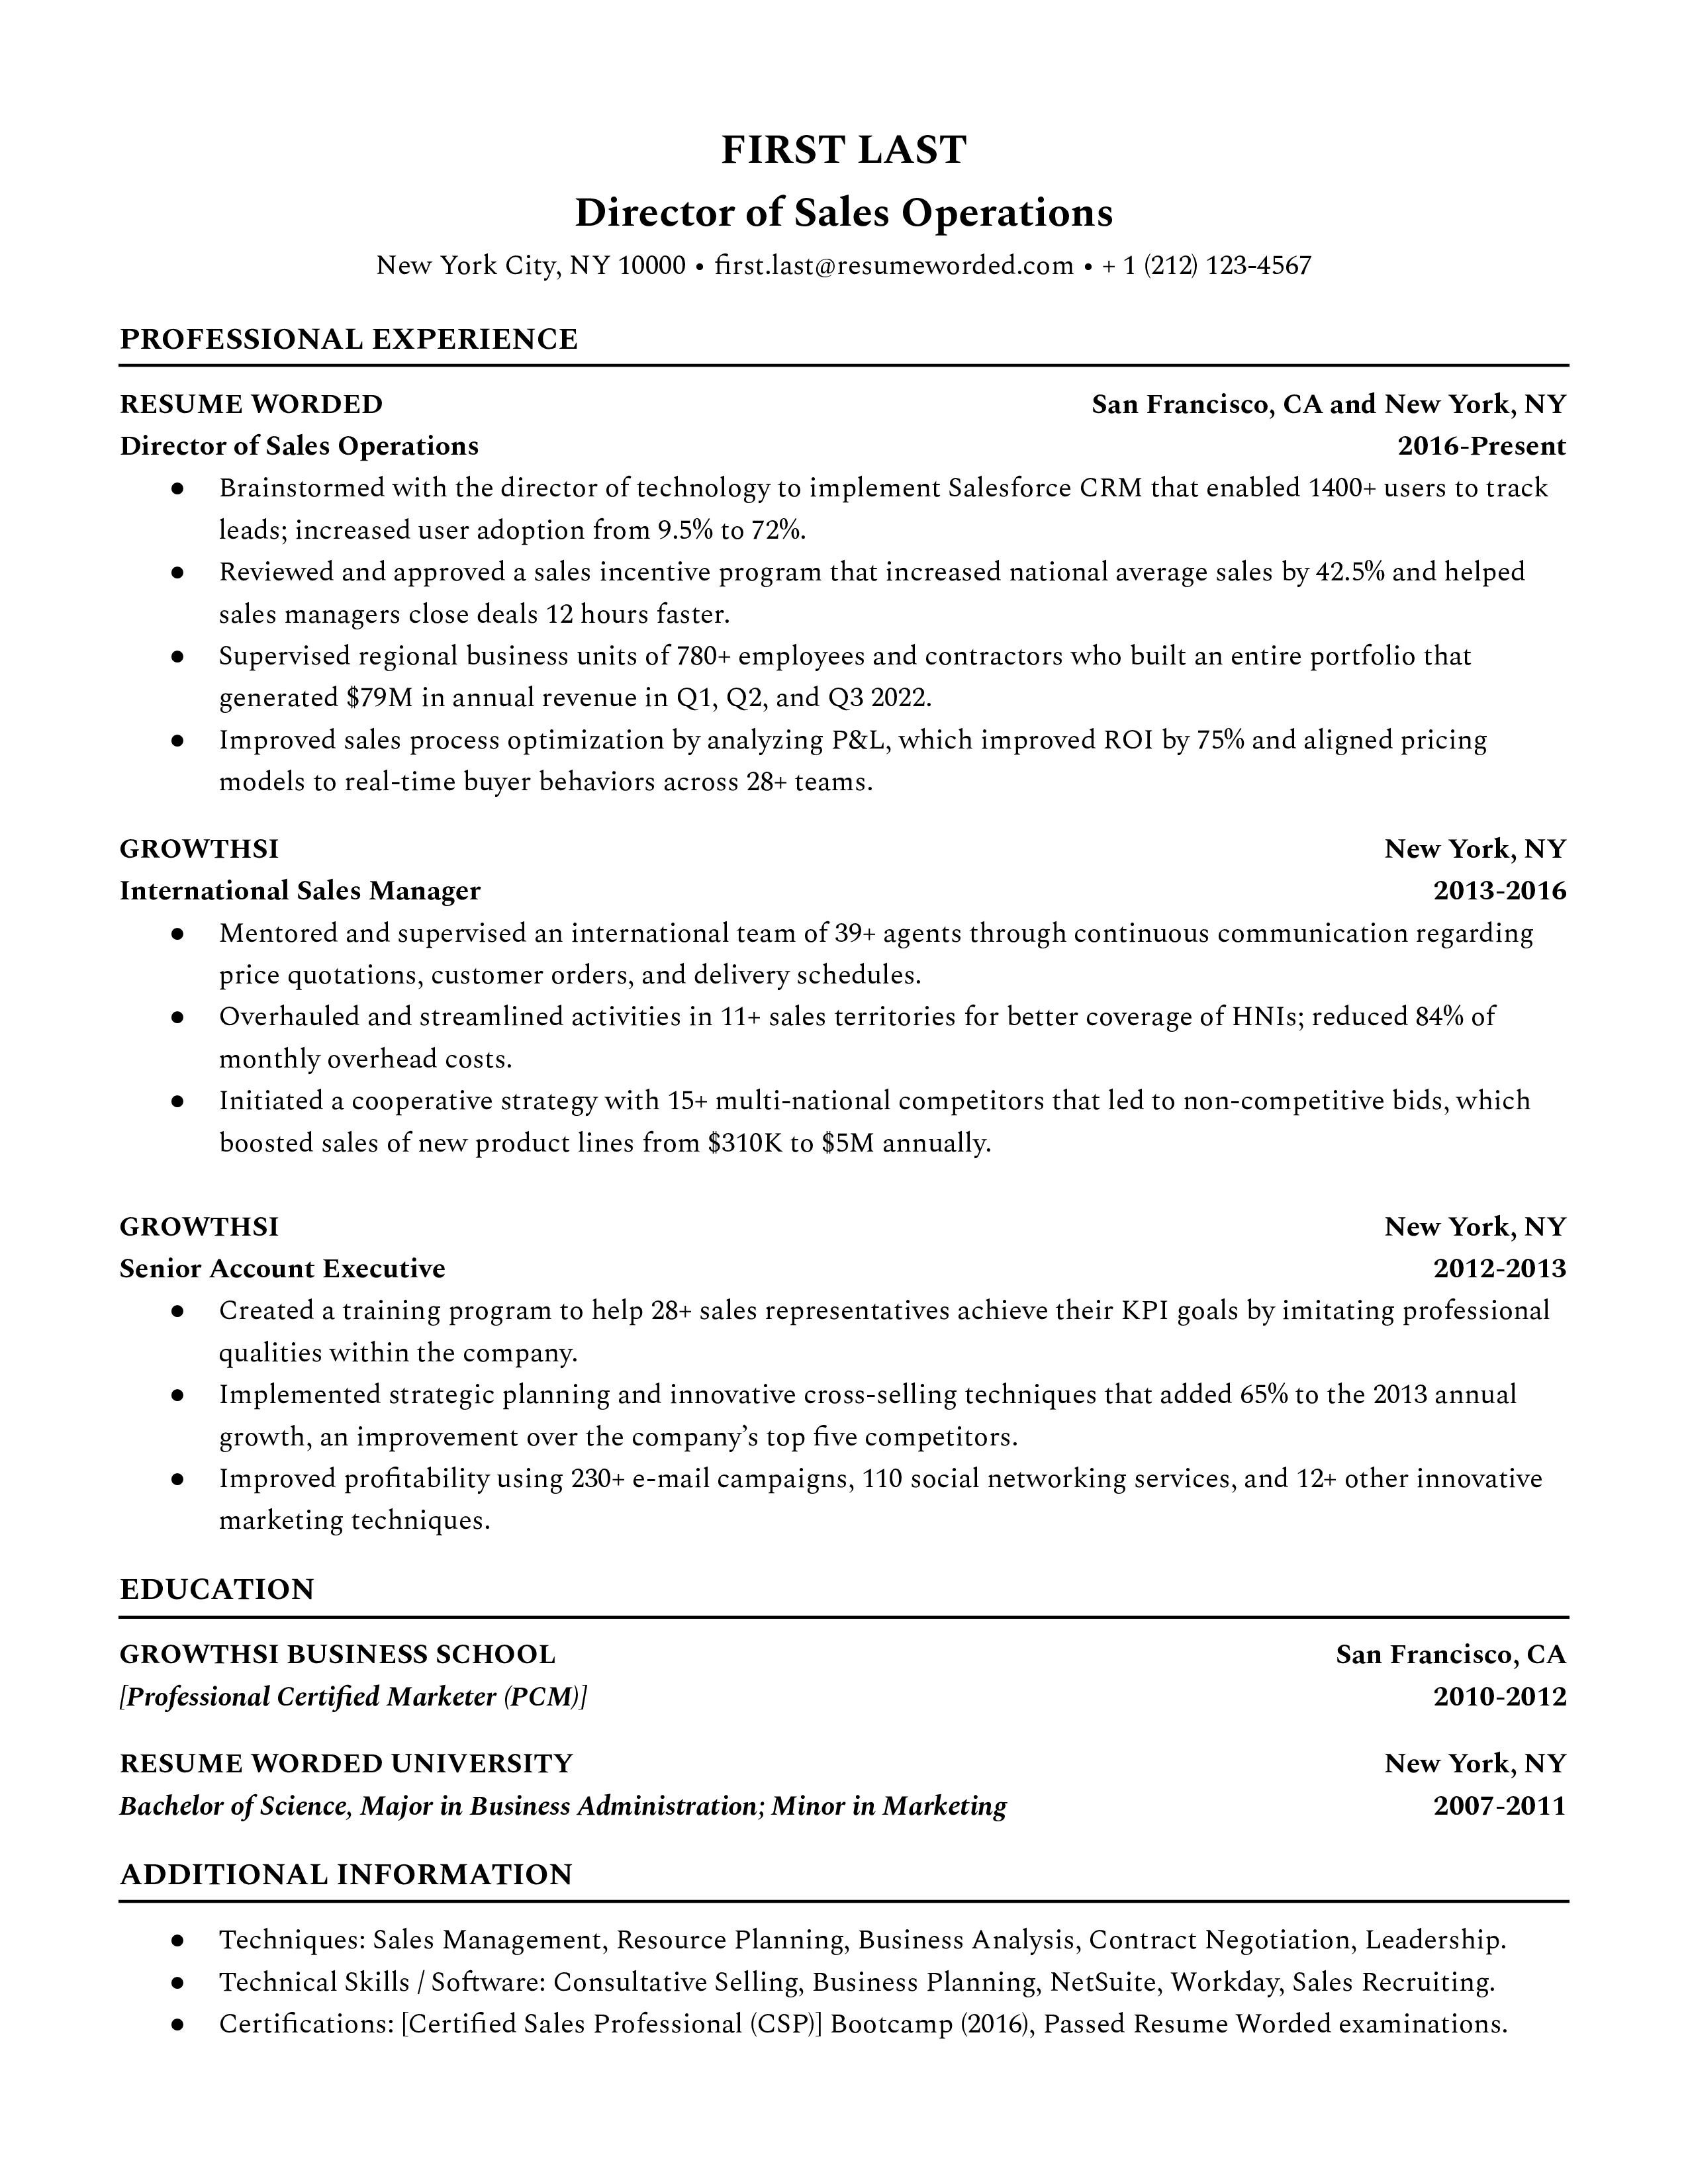 Director of Sales Operations Resume Sample